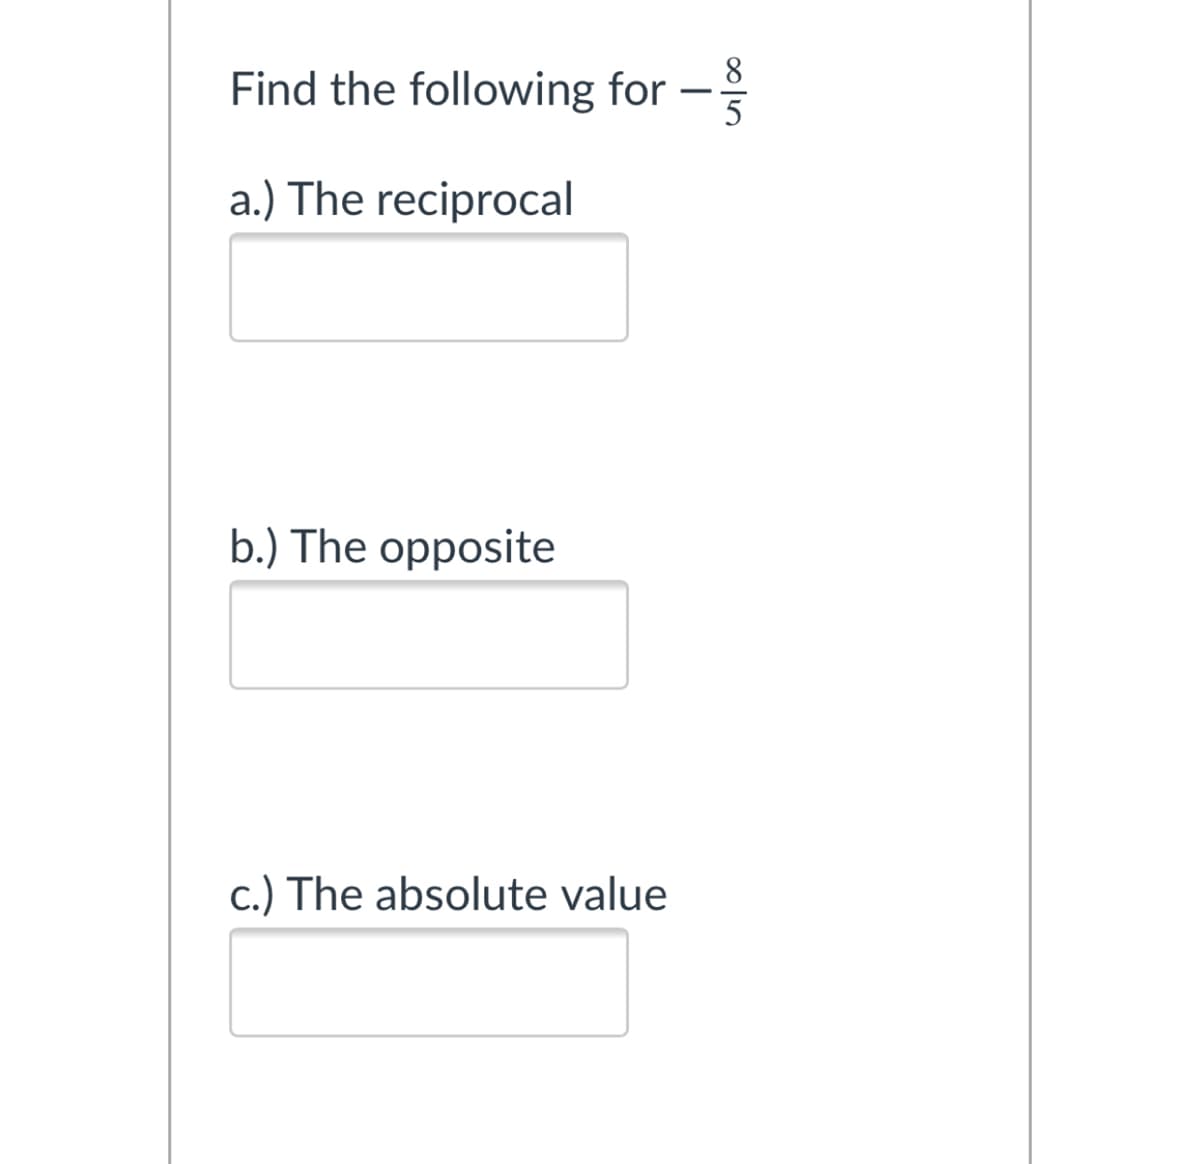 8.
Find the following for
-
a.) The reciprocal
b.) The opposite
c.) The absolute value
